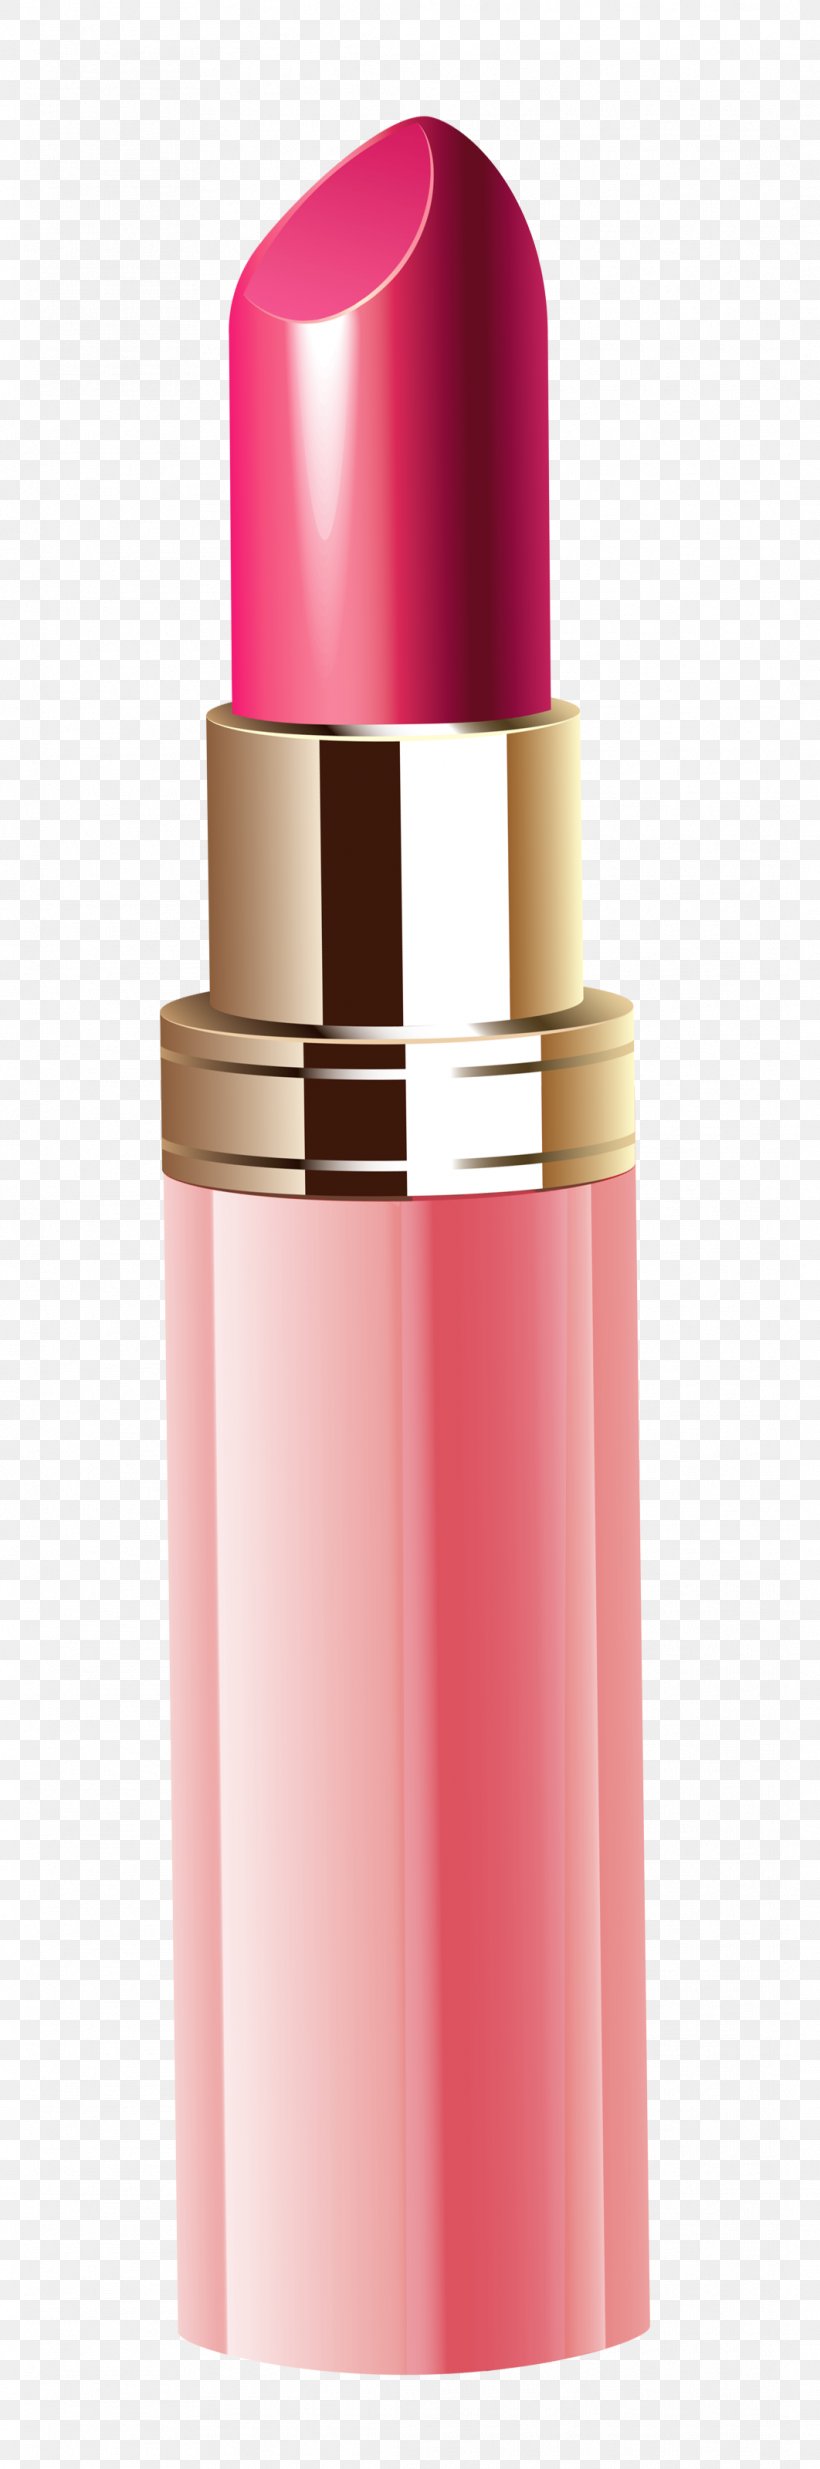 Lipstick Cosmetics Clip Art, PNG, 1062x3198px, Lipstick, Color, Cosmetics, Eye Shadow, Health Beauty Download Free